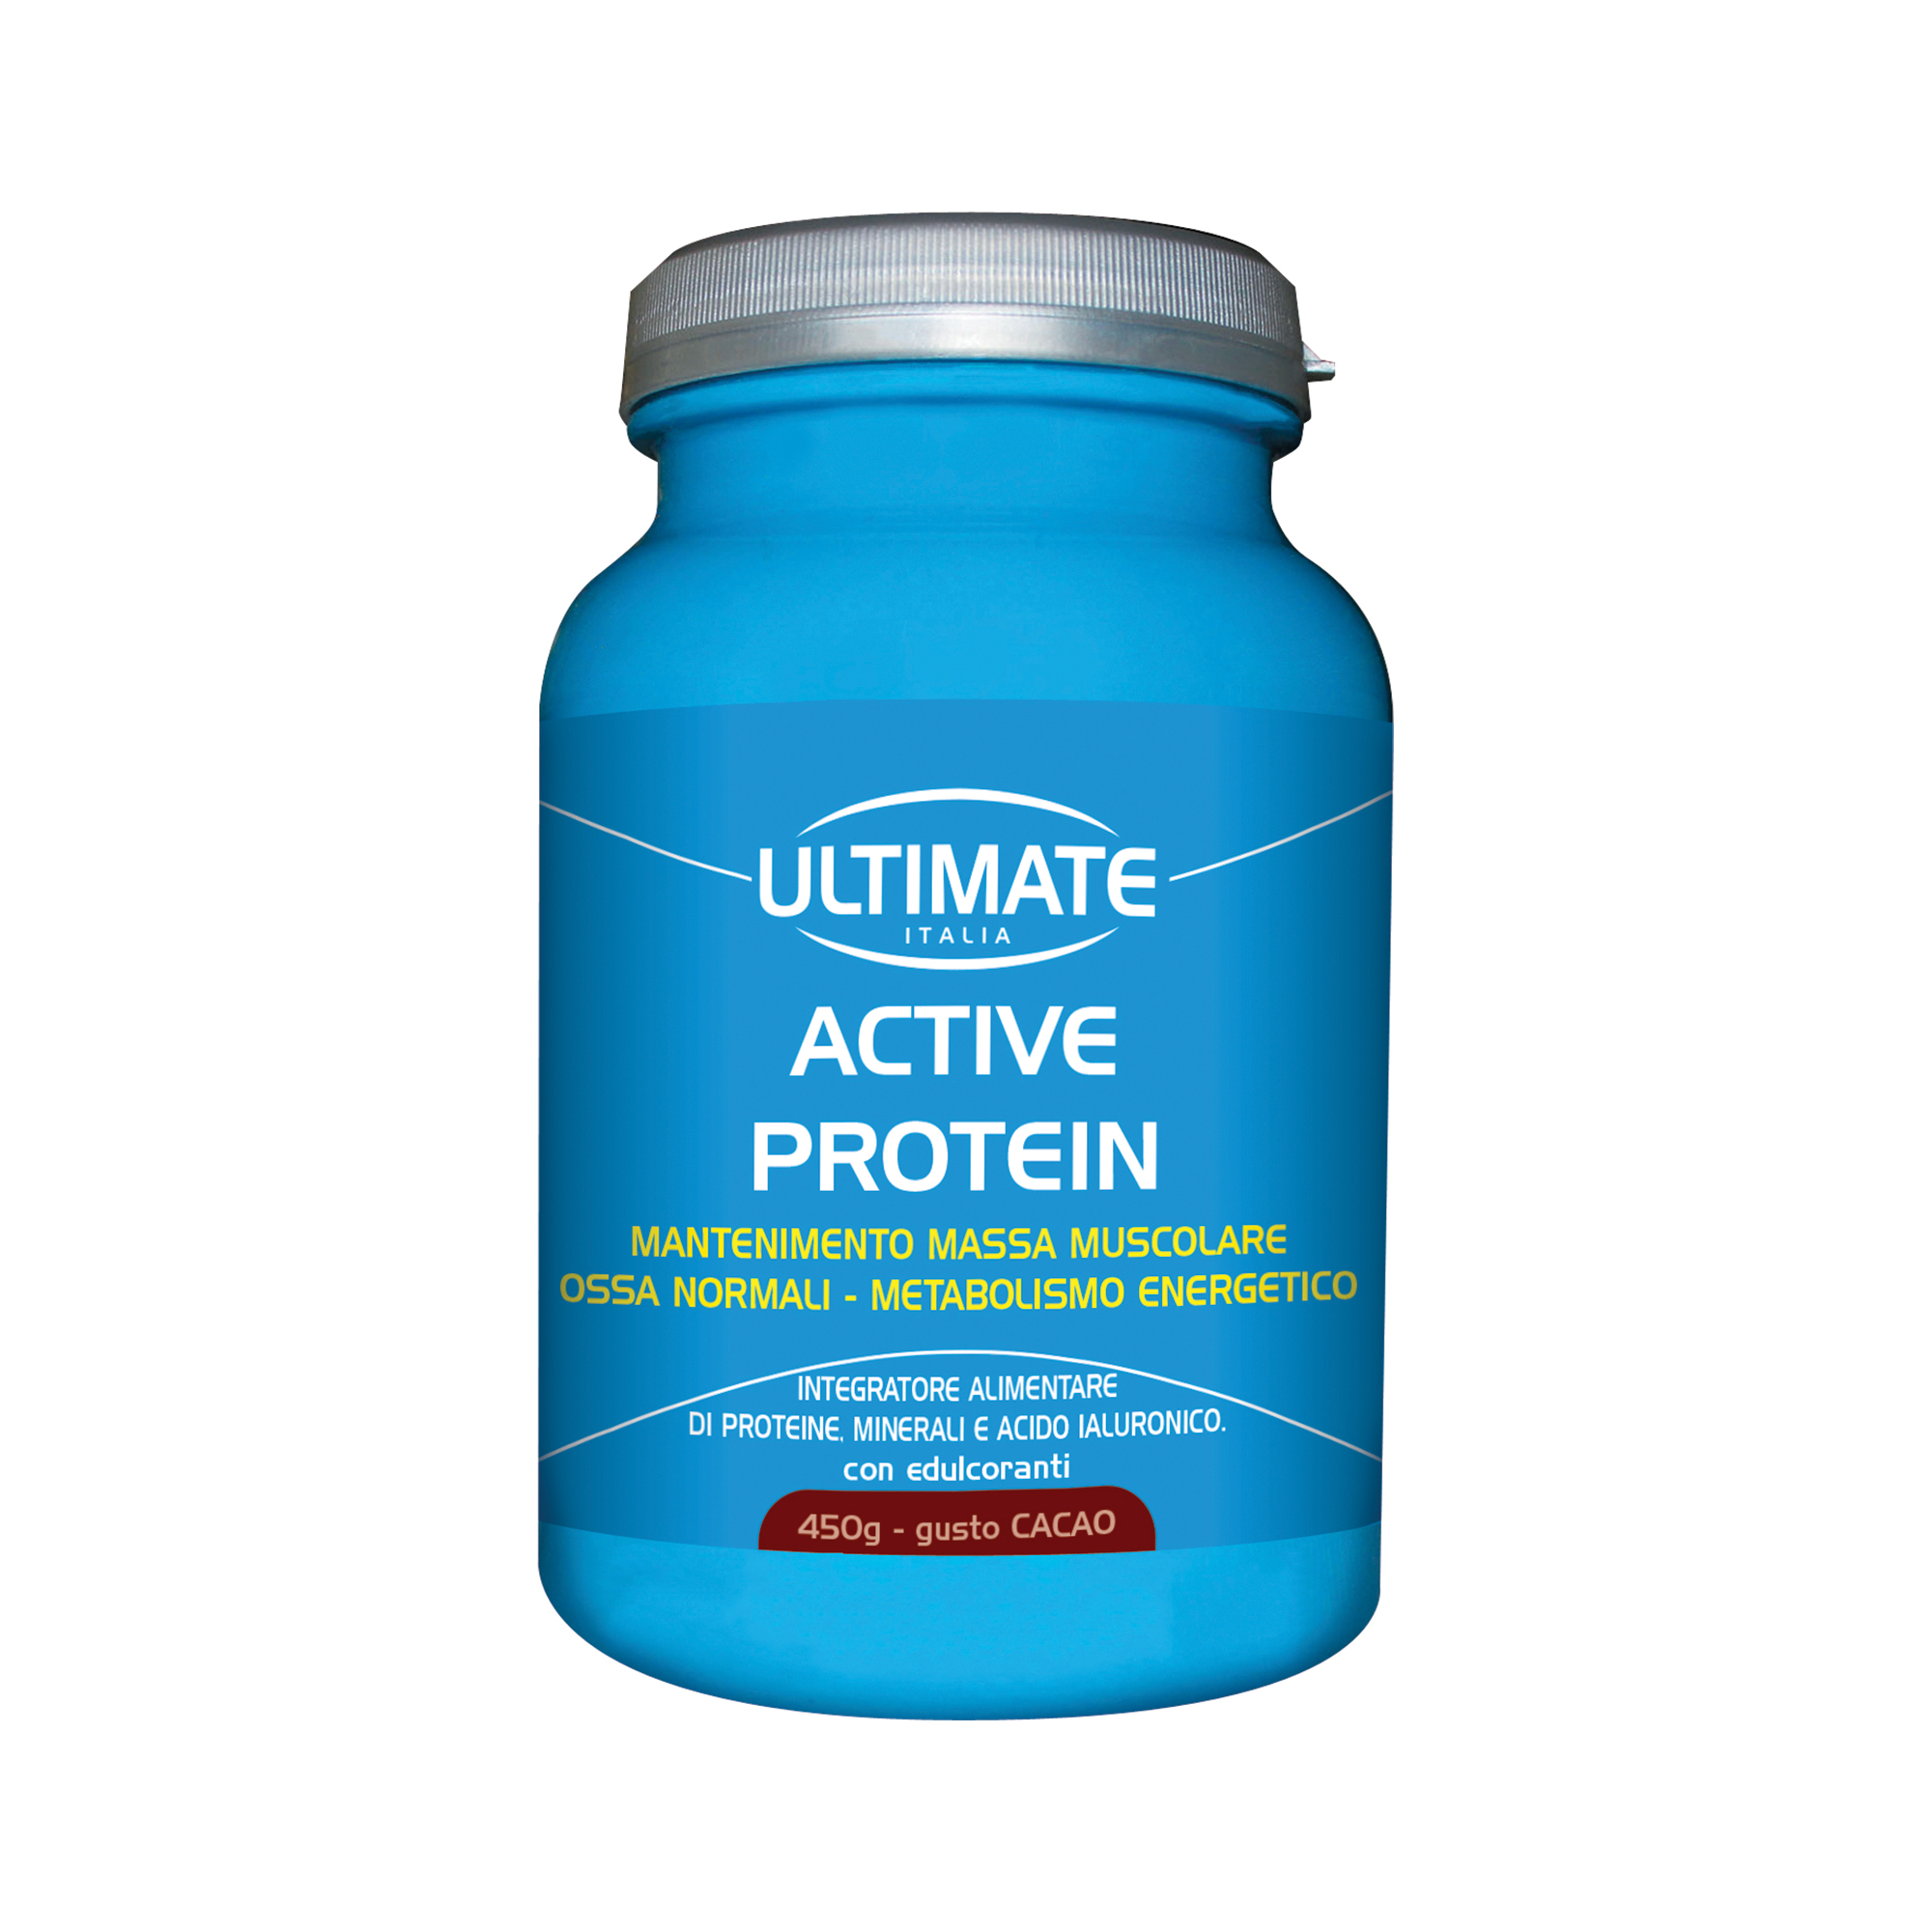 Image of Active Protein Cacao Ultimate 450g